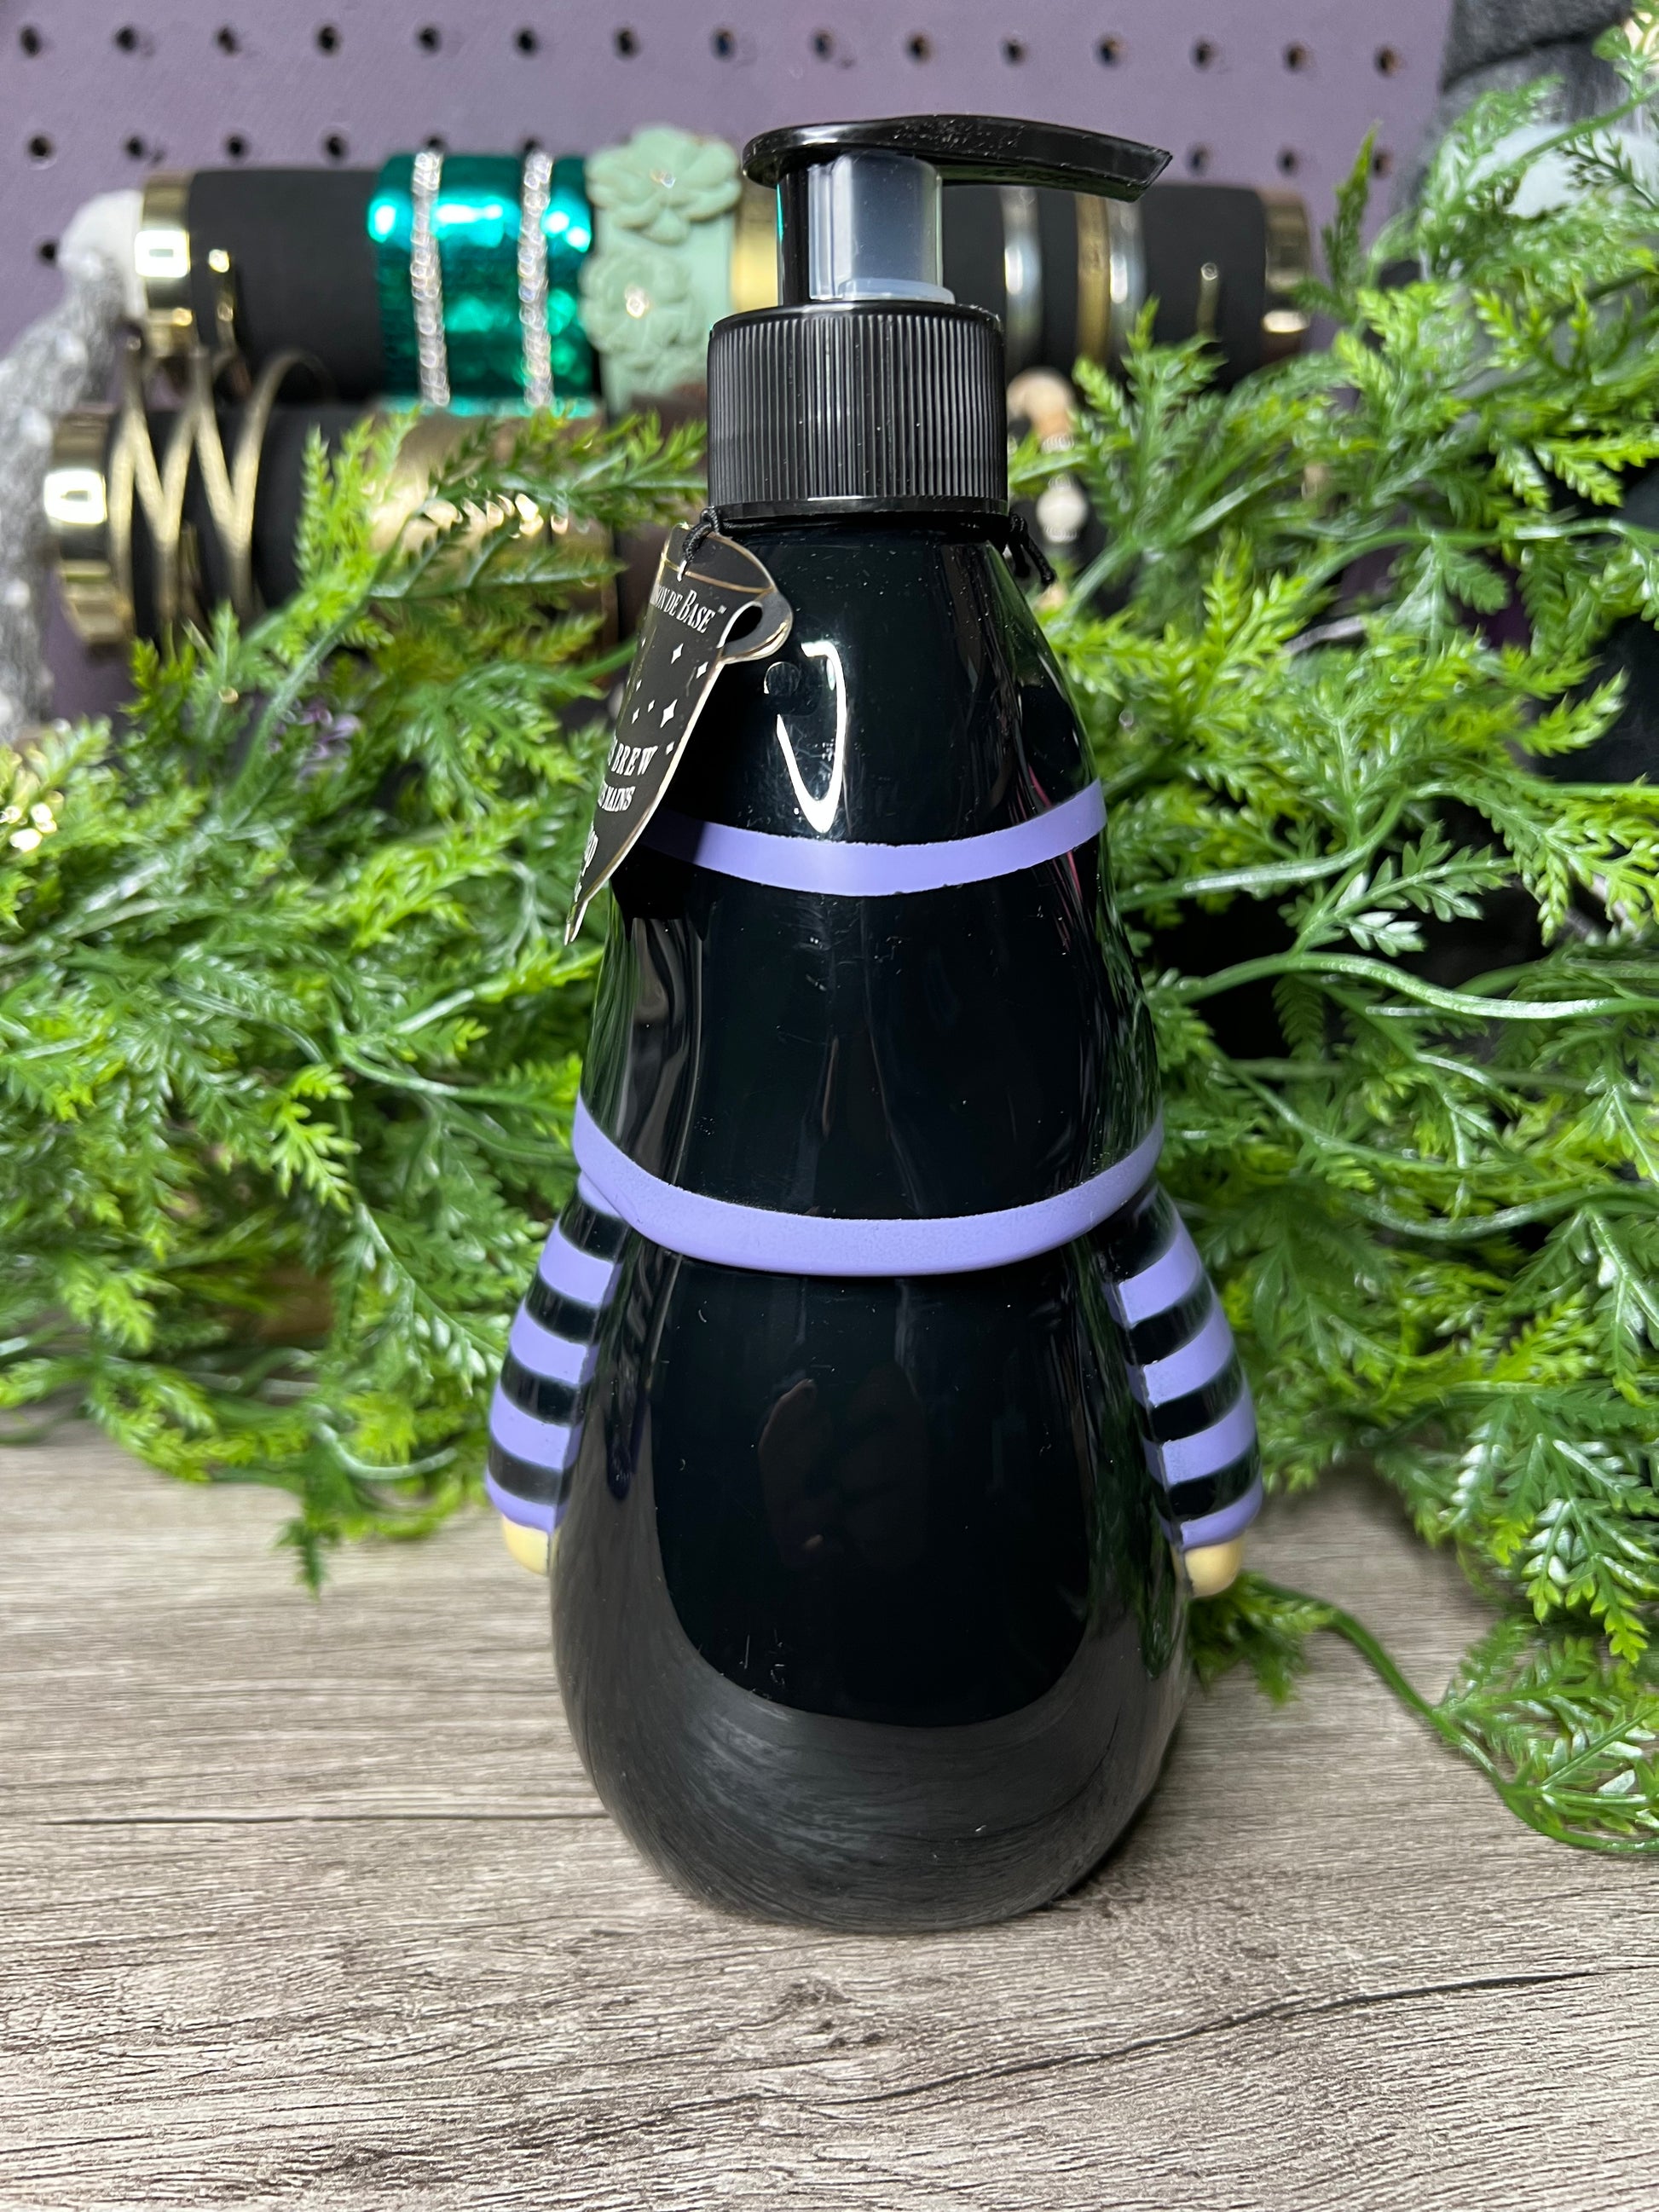 Halloween-themed gnome-shaped hand soap dispenser in purple and black